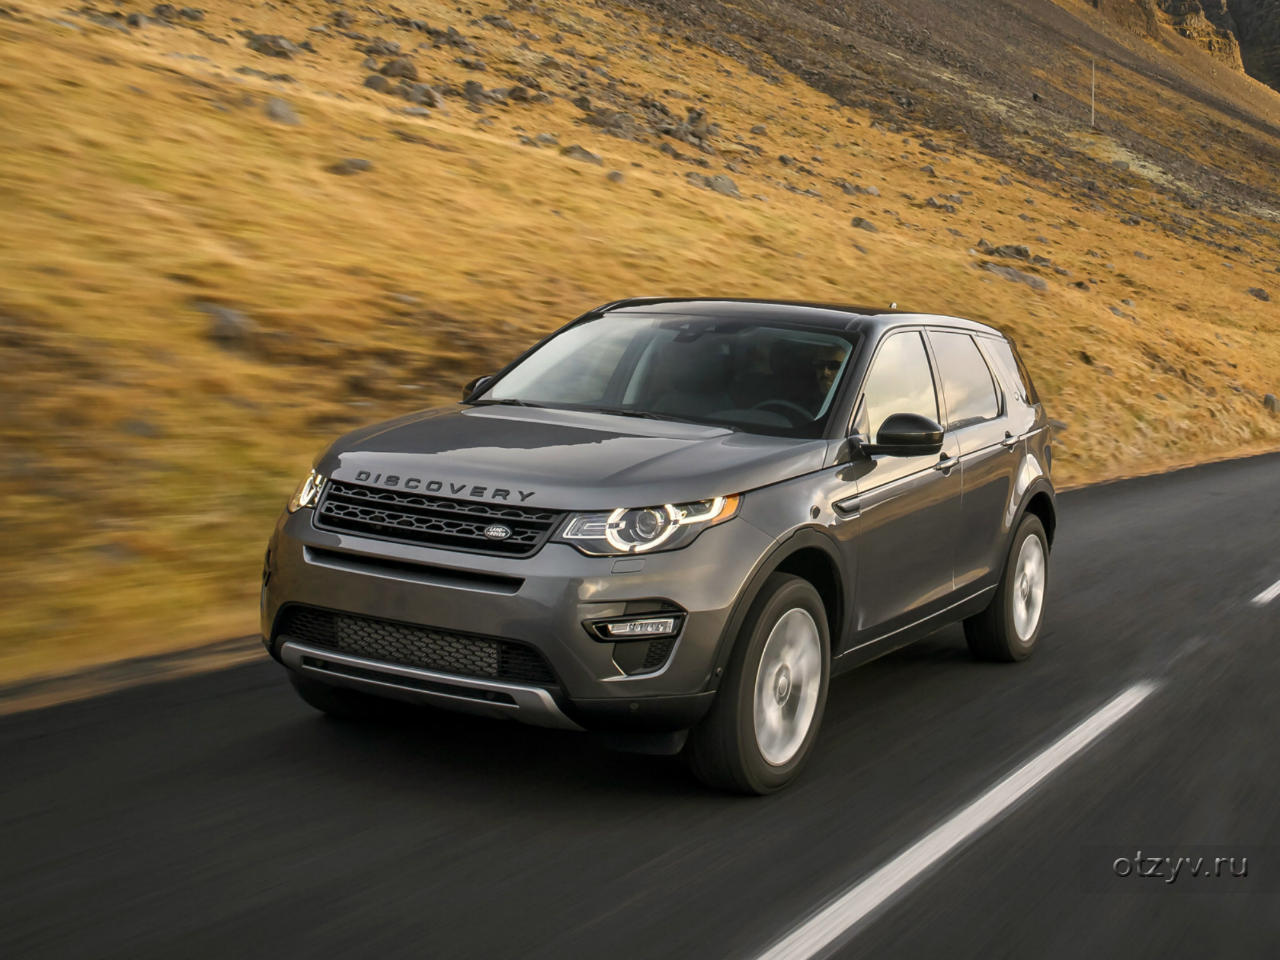 Land Rover Discovery Sport l550 2015. Land Rover Discovery Sport 2. L 550 Дискавери спорт. Ленд Ровер Дискавери спорт 2017. Кроссоверы дизель